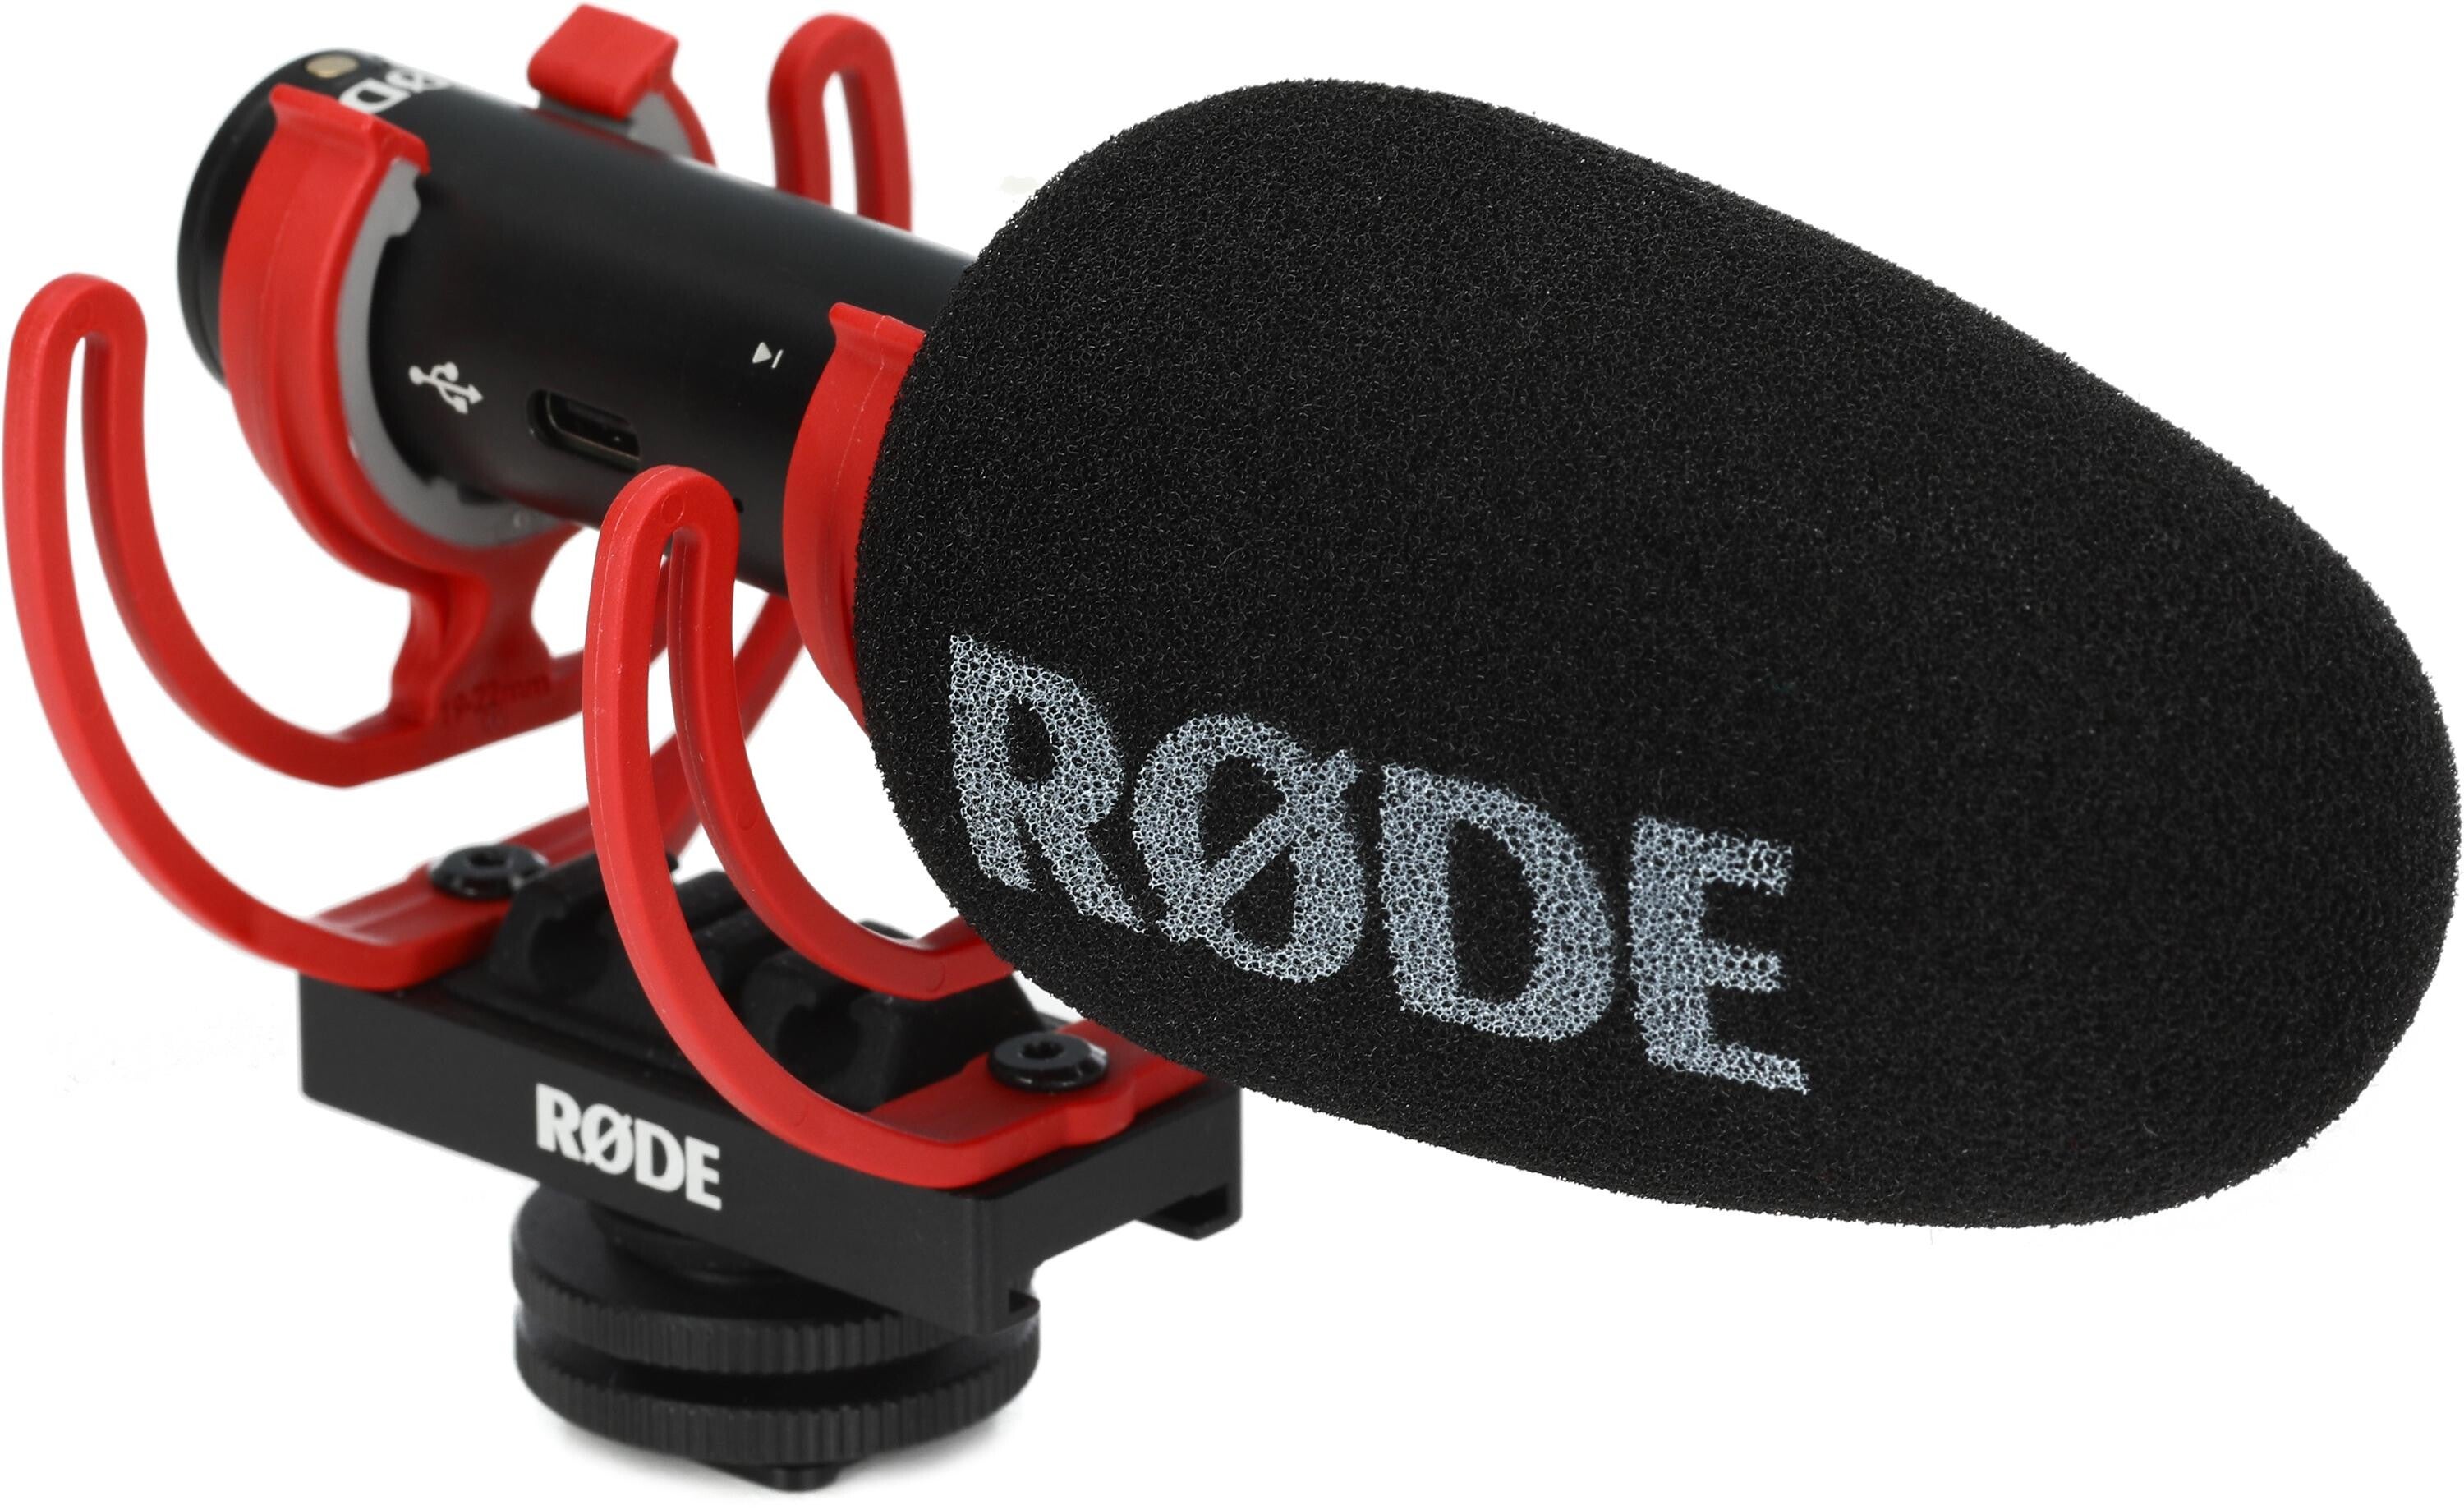 The Rode VideoMic GO II should be your new go-to low budget on-camera  microphone